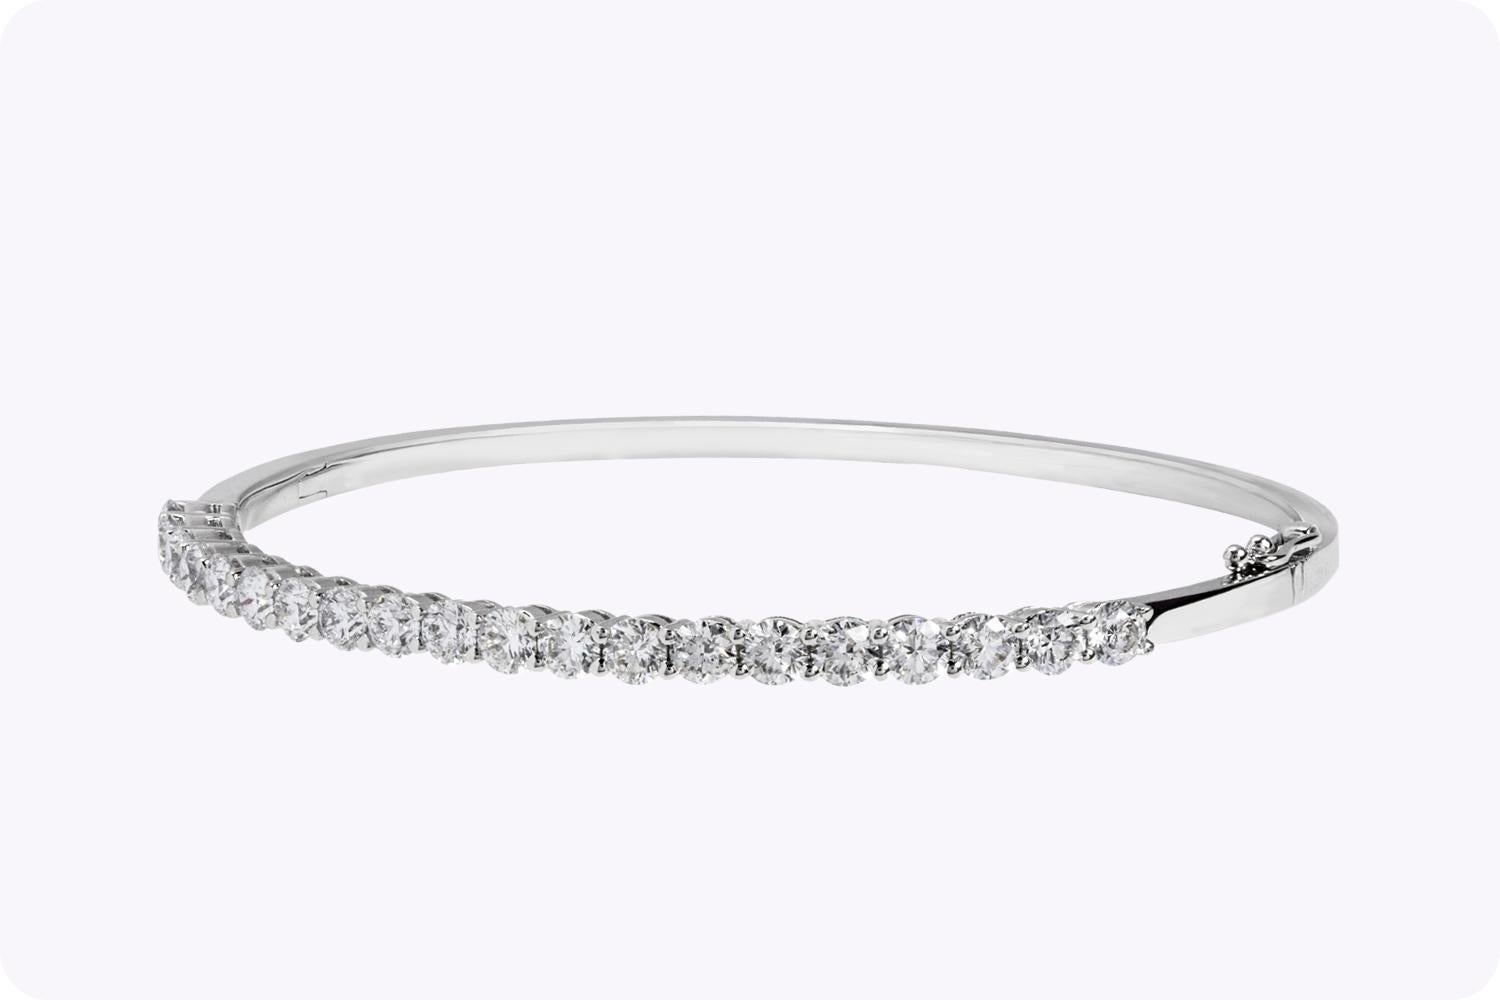 Sparkle in the spotlight with this diamond bangle bracelet. Features 20 full-cut round diamonds each elegantly set in an 18K white gold basket. Diamonds weigh 3.12 carats total. A hinged design bracelet for easy wear and removal. Made in 18k white